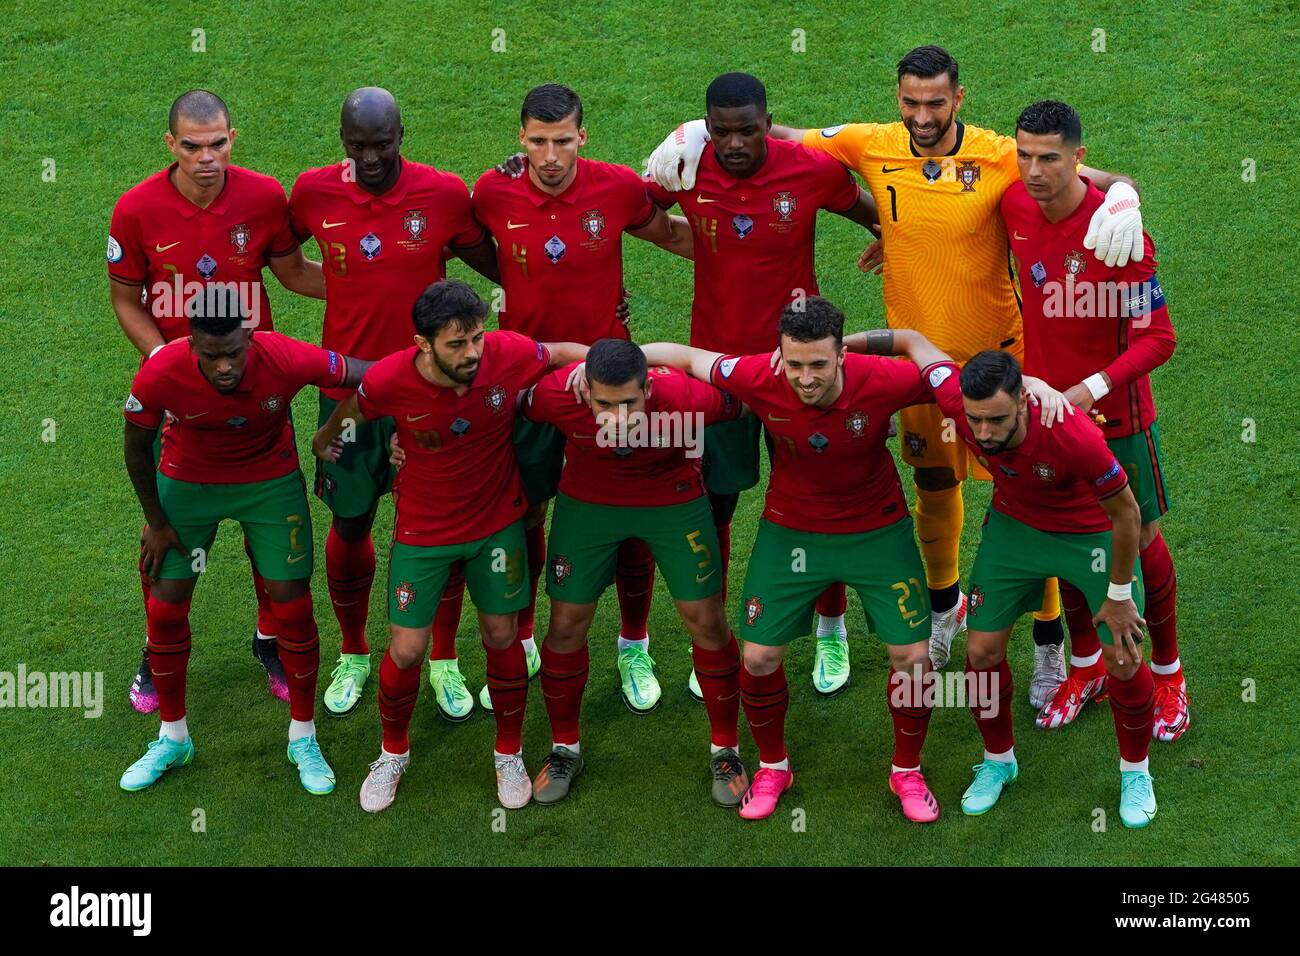 MUNCHEN, GERMANY - JUNE 19: Teamphoto of Portugal with top line Pepe of Portugal, Danilo of Portugal, Ruben Dias of Portugal, William Carvalho of Portugal, Rui Patricio of Portugal and Cristiano Ronaldo of Portugal and bottom line with Nelson Semedo of Portugal, Bernardo Silva of Portugal, Raphael Guerreiro of Portugal, Diogo Jota of Portugal and Bruno Fernandes of Portugal during the UEFA Euro 2020 Group F match between Portugal and Germany at Allianz Arena on June 19, 2021 in Munchen, Germany (Photo by Andre Weening/Orange Pictures) Stock Photo